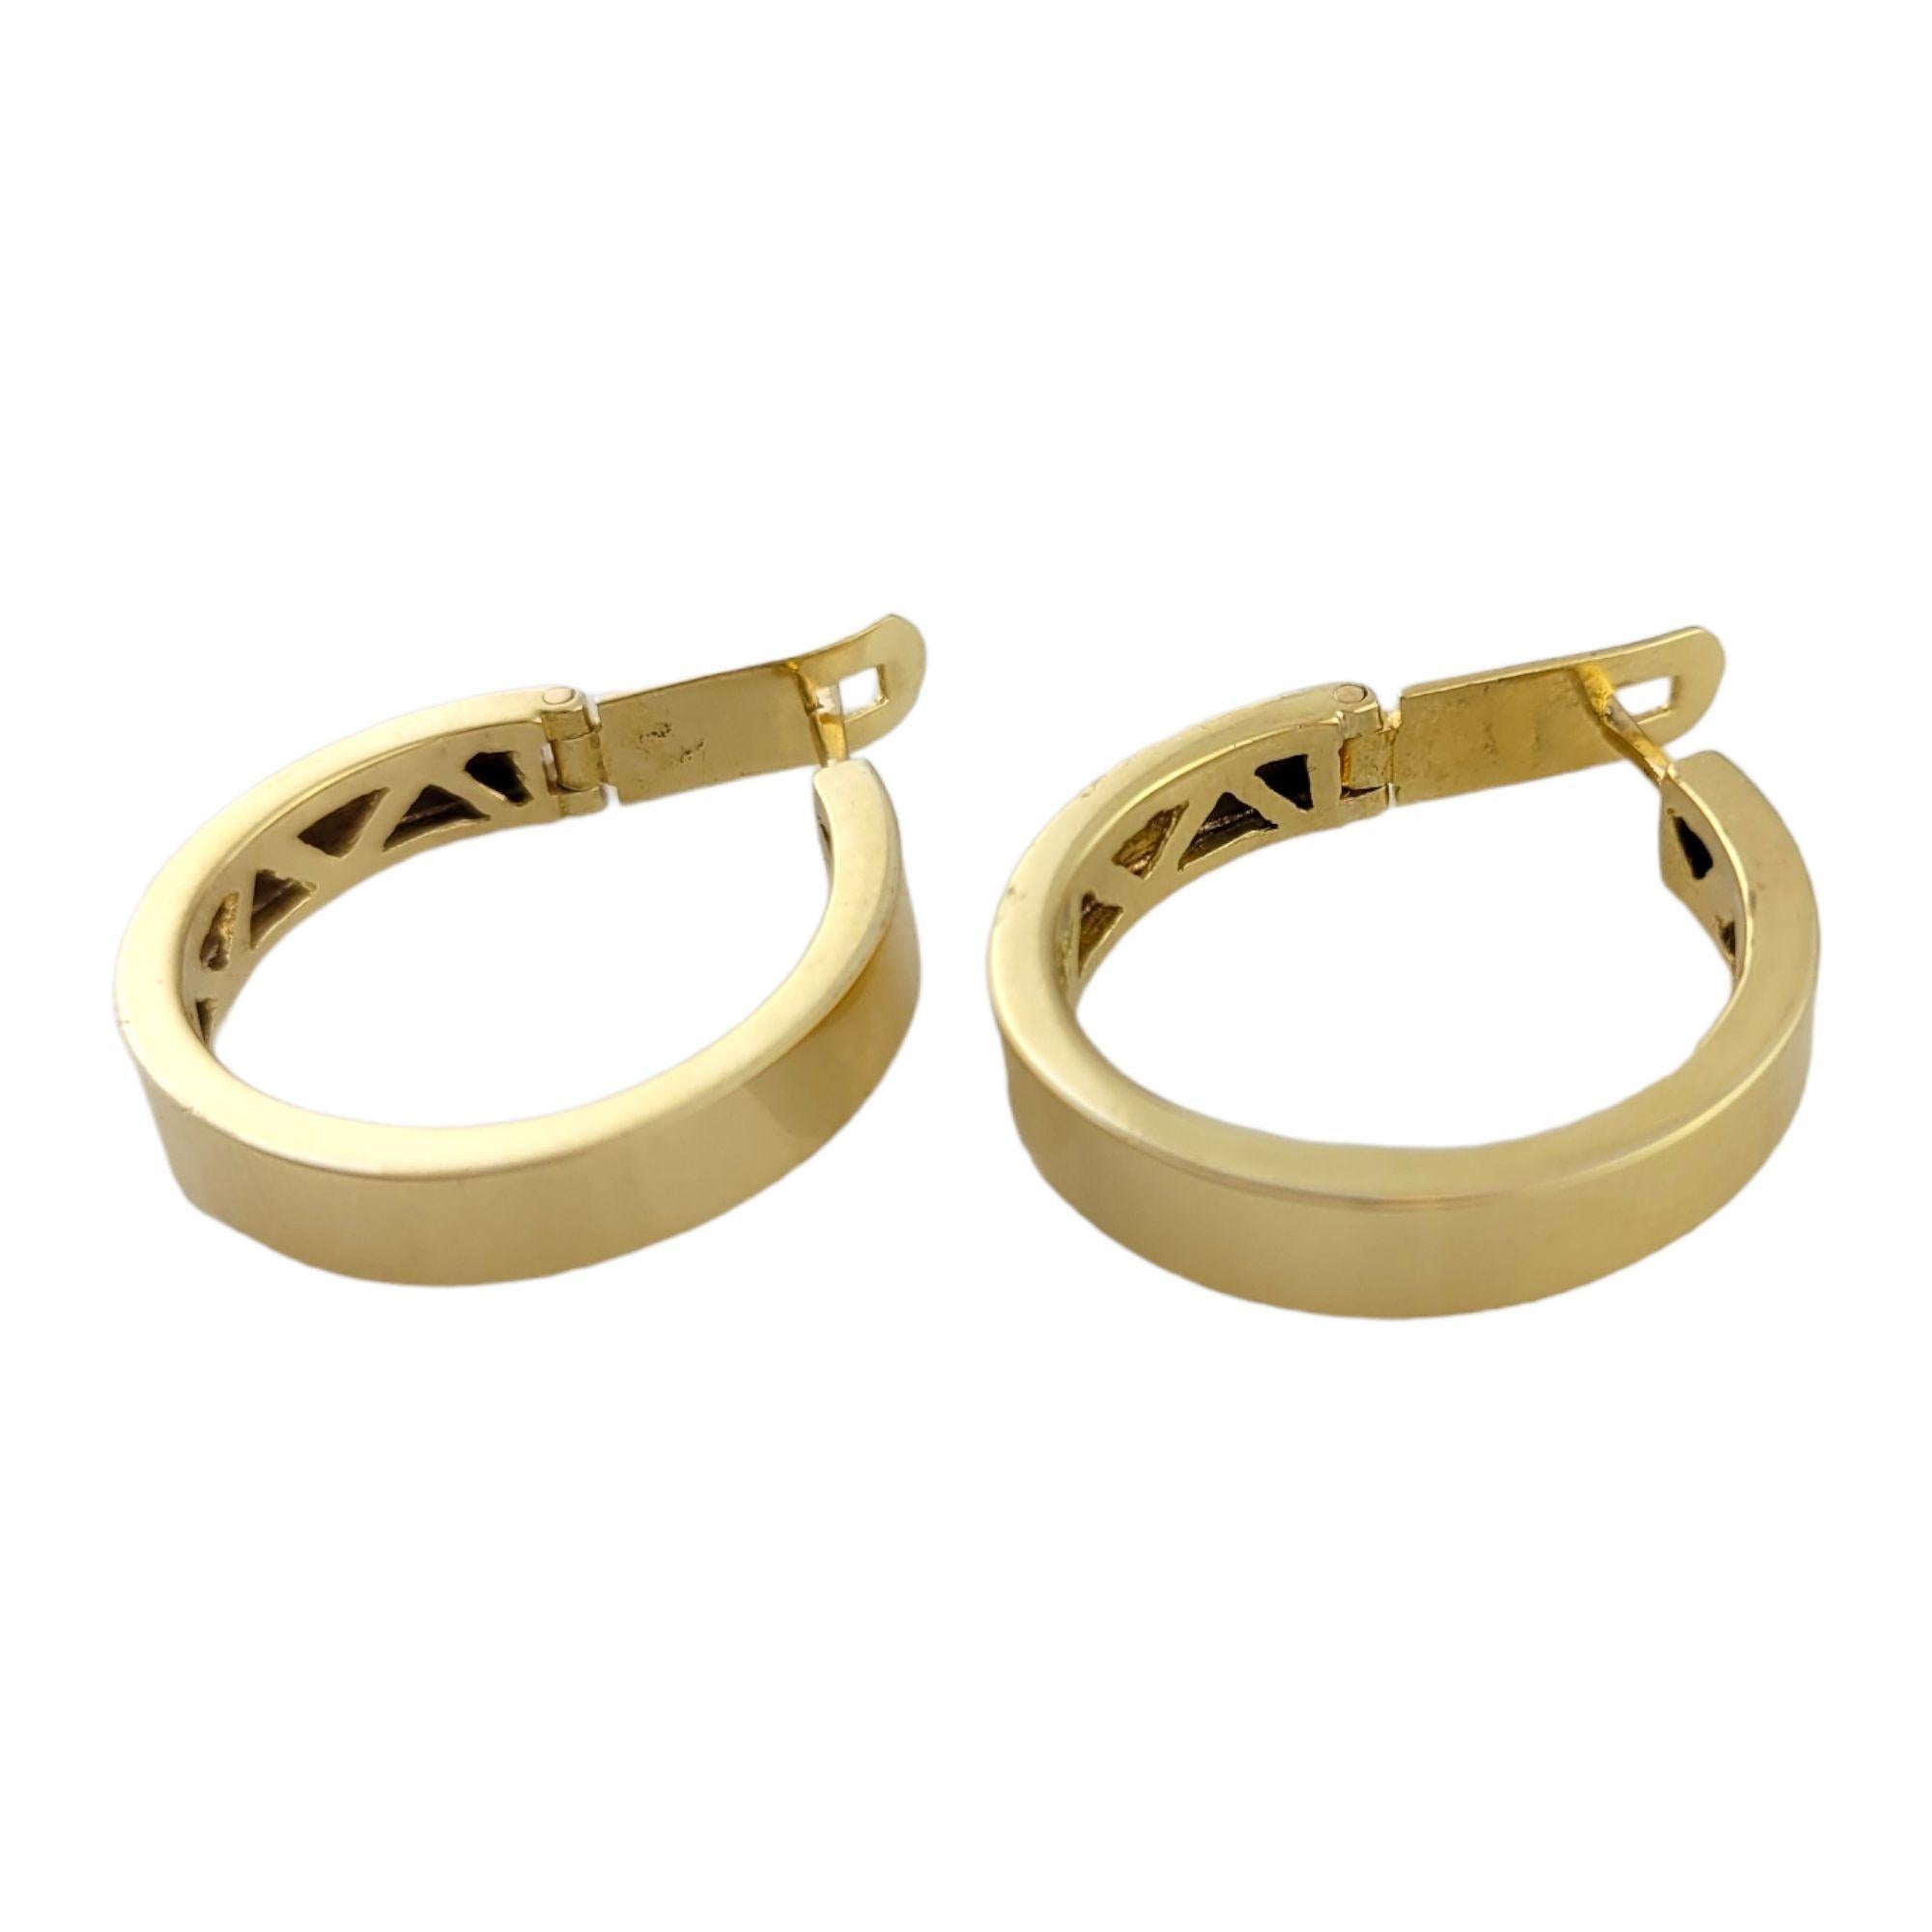 Vintage 18K Yellow Gold Hoops

These beautiful flat hoops are made from 18K yellow gold!

Size: 24mm X 30mm X 5mm

Weight: 6.2 g/ 3.9 dwt

Hallmark: 18K 22599

Very good condition, professionally polished.

Will come packaged in a gift box or pouch